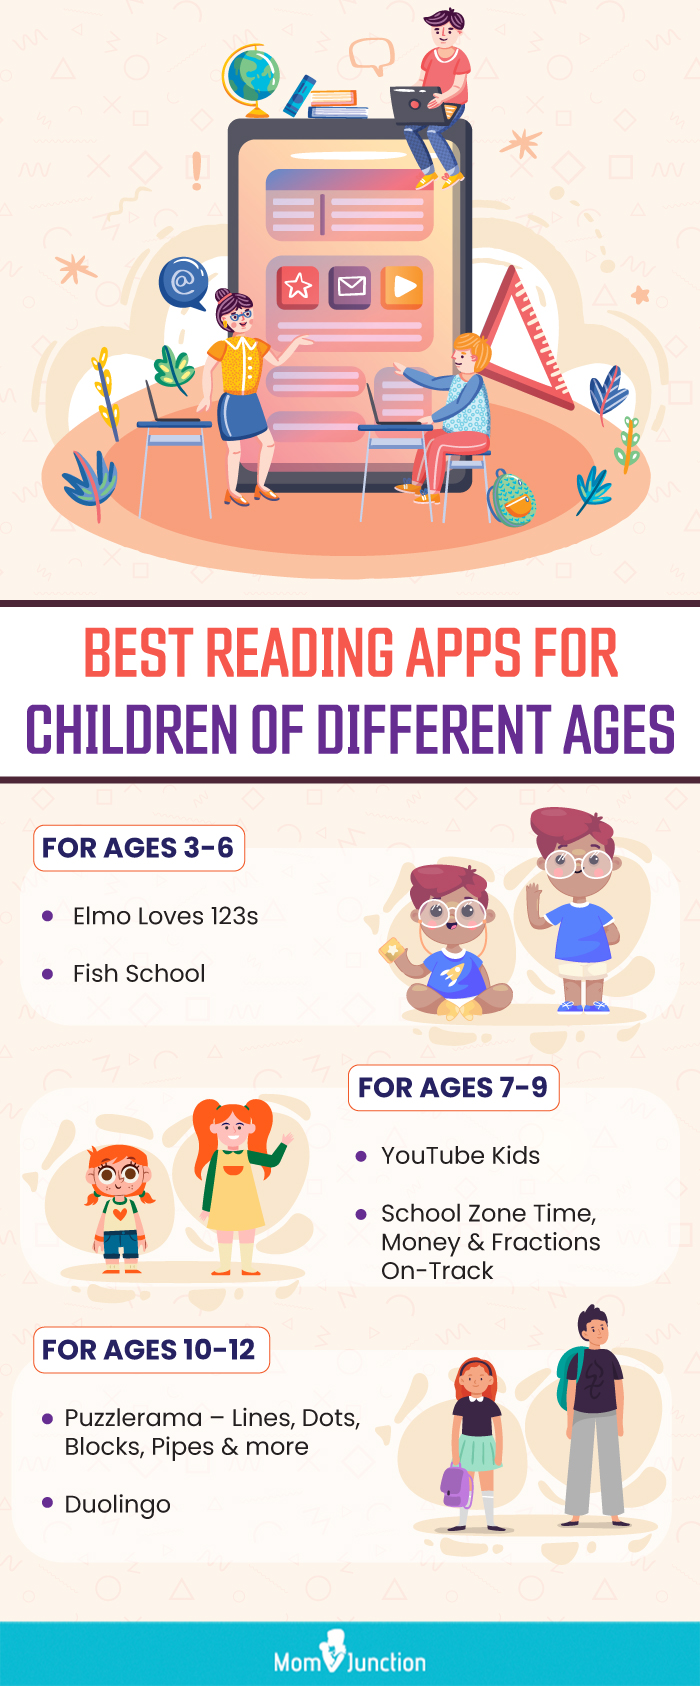 best reading apps for children of different ages (infographic)